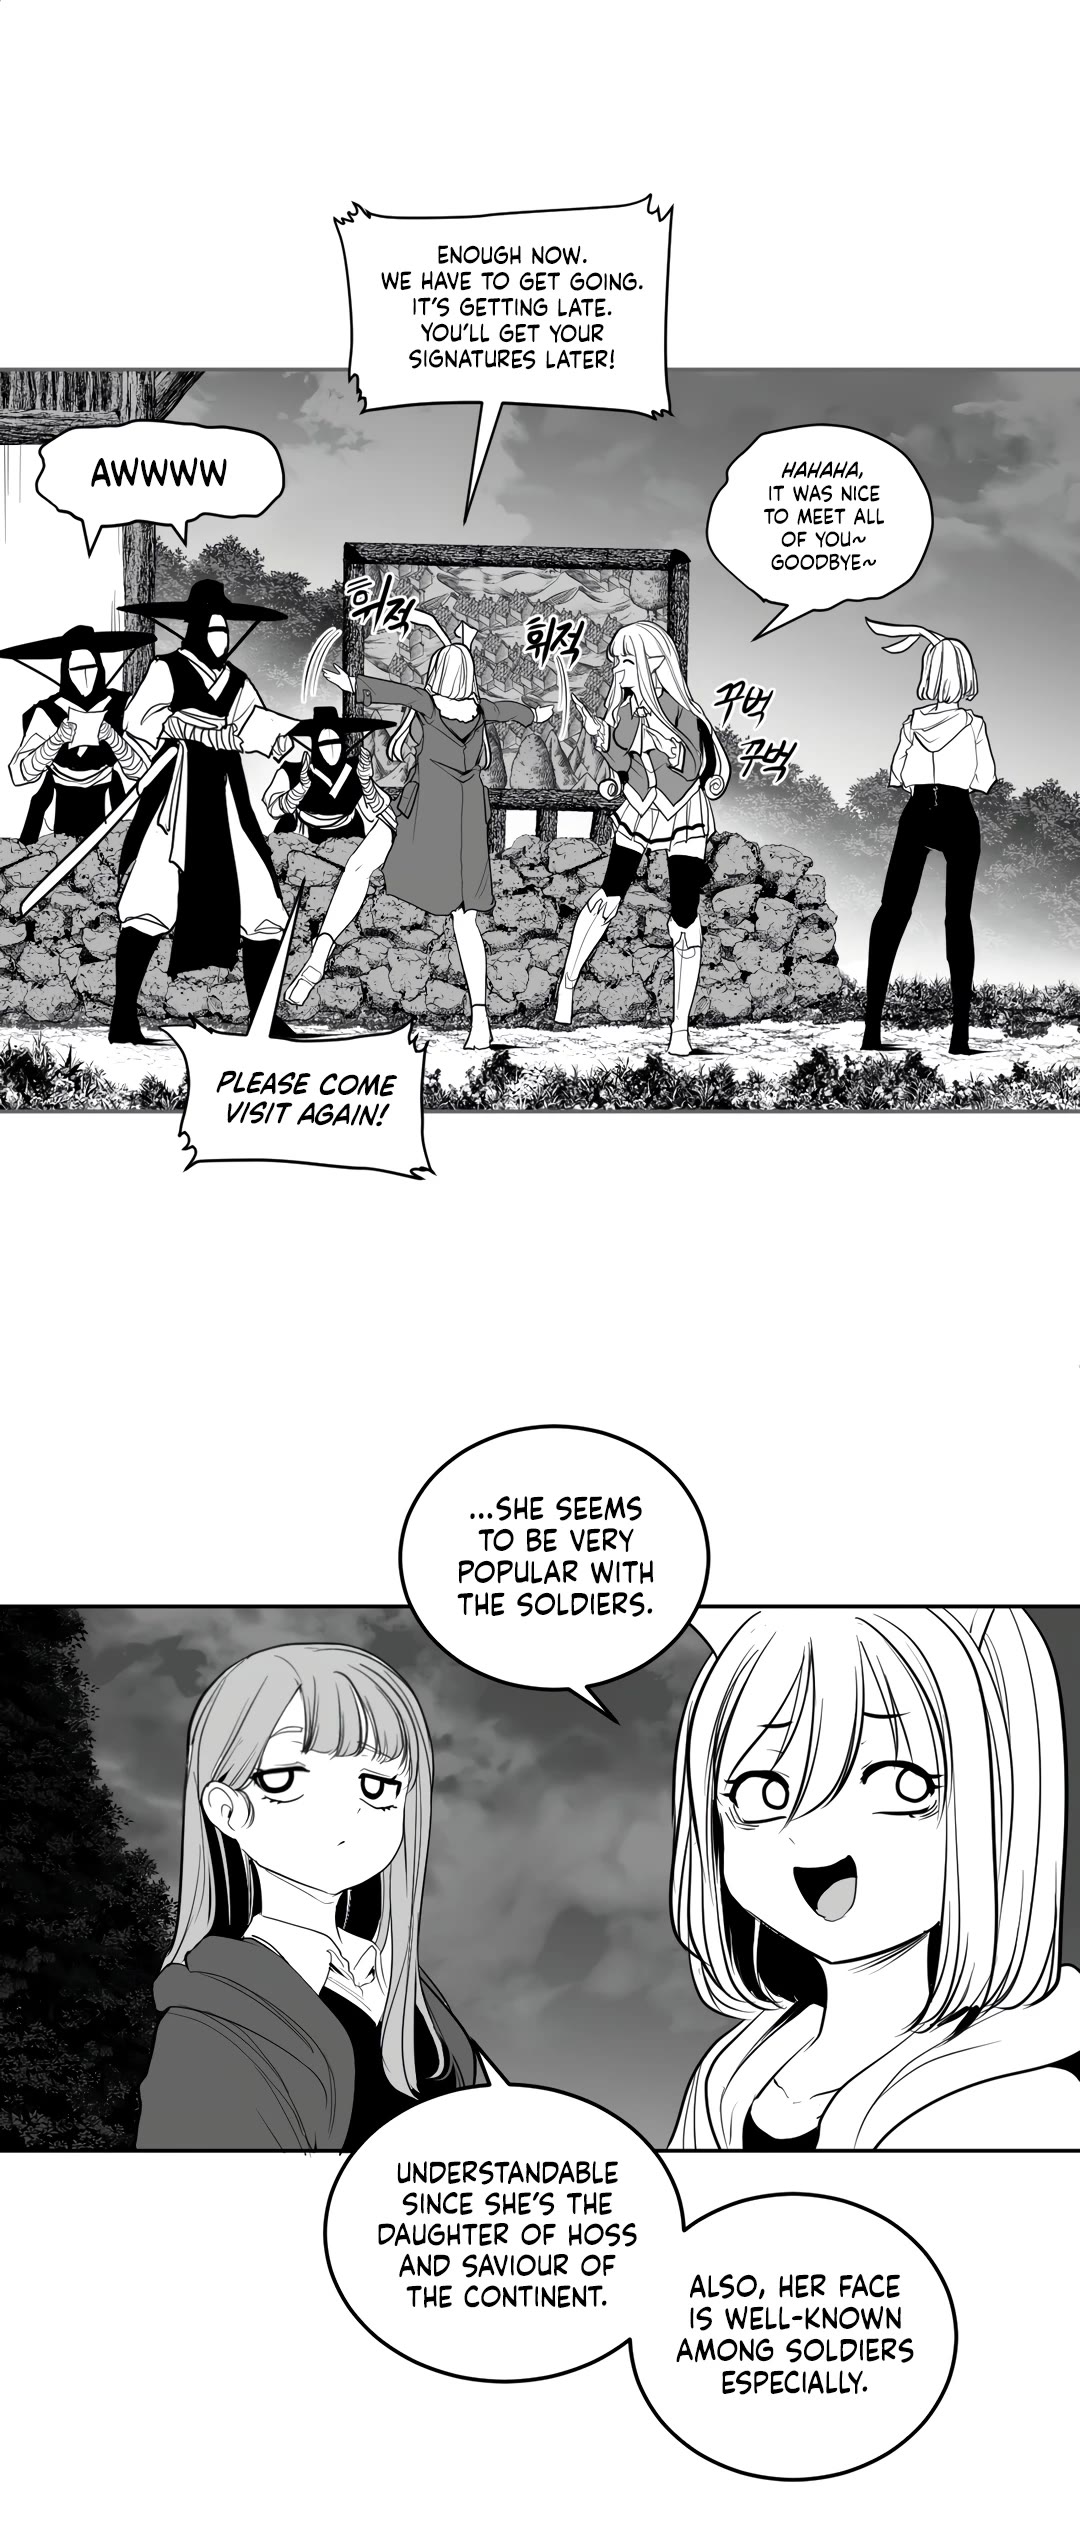 What Happens Inside The Dungeon Chapter 117: Side Story - Chapter 7 - Picture 3